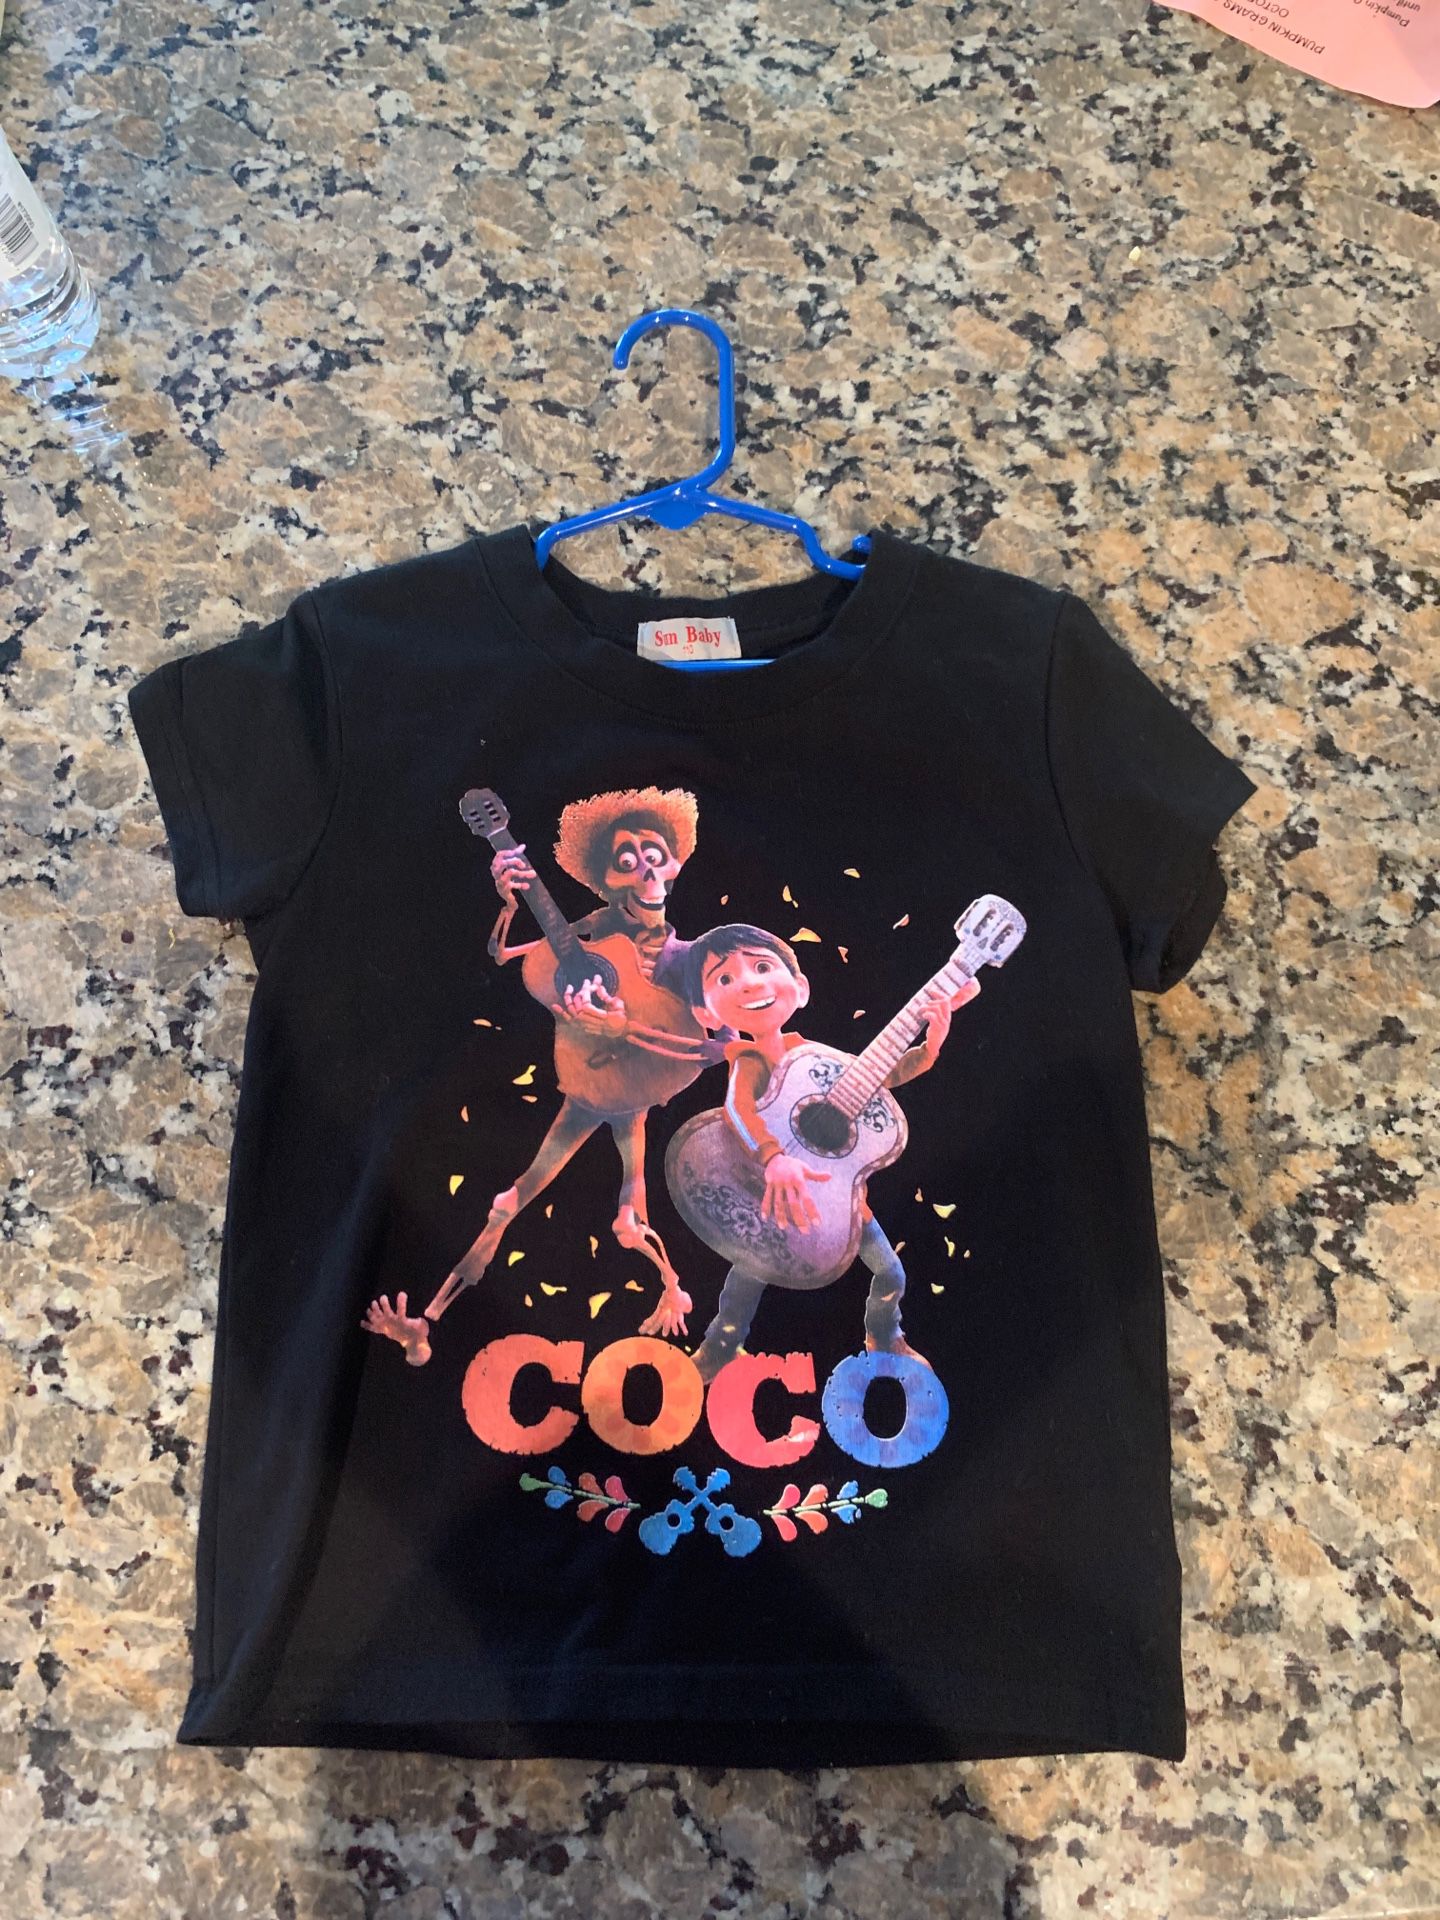 Toddler COCO t-shirt size 4-5